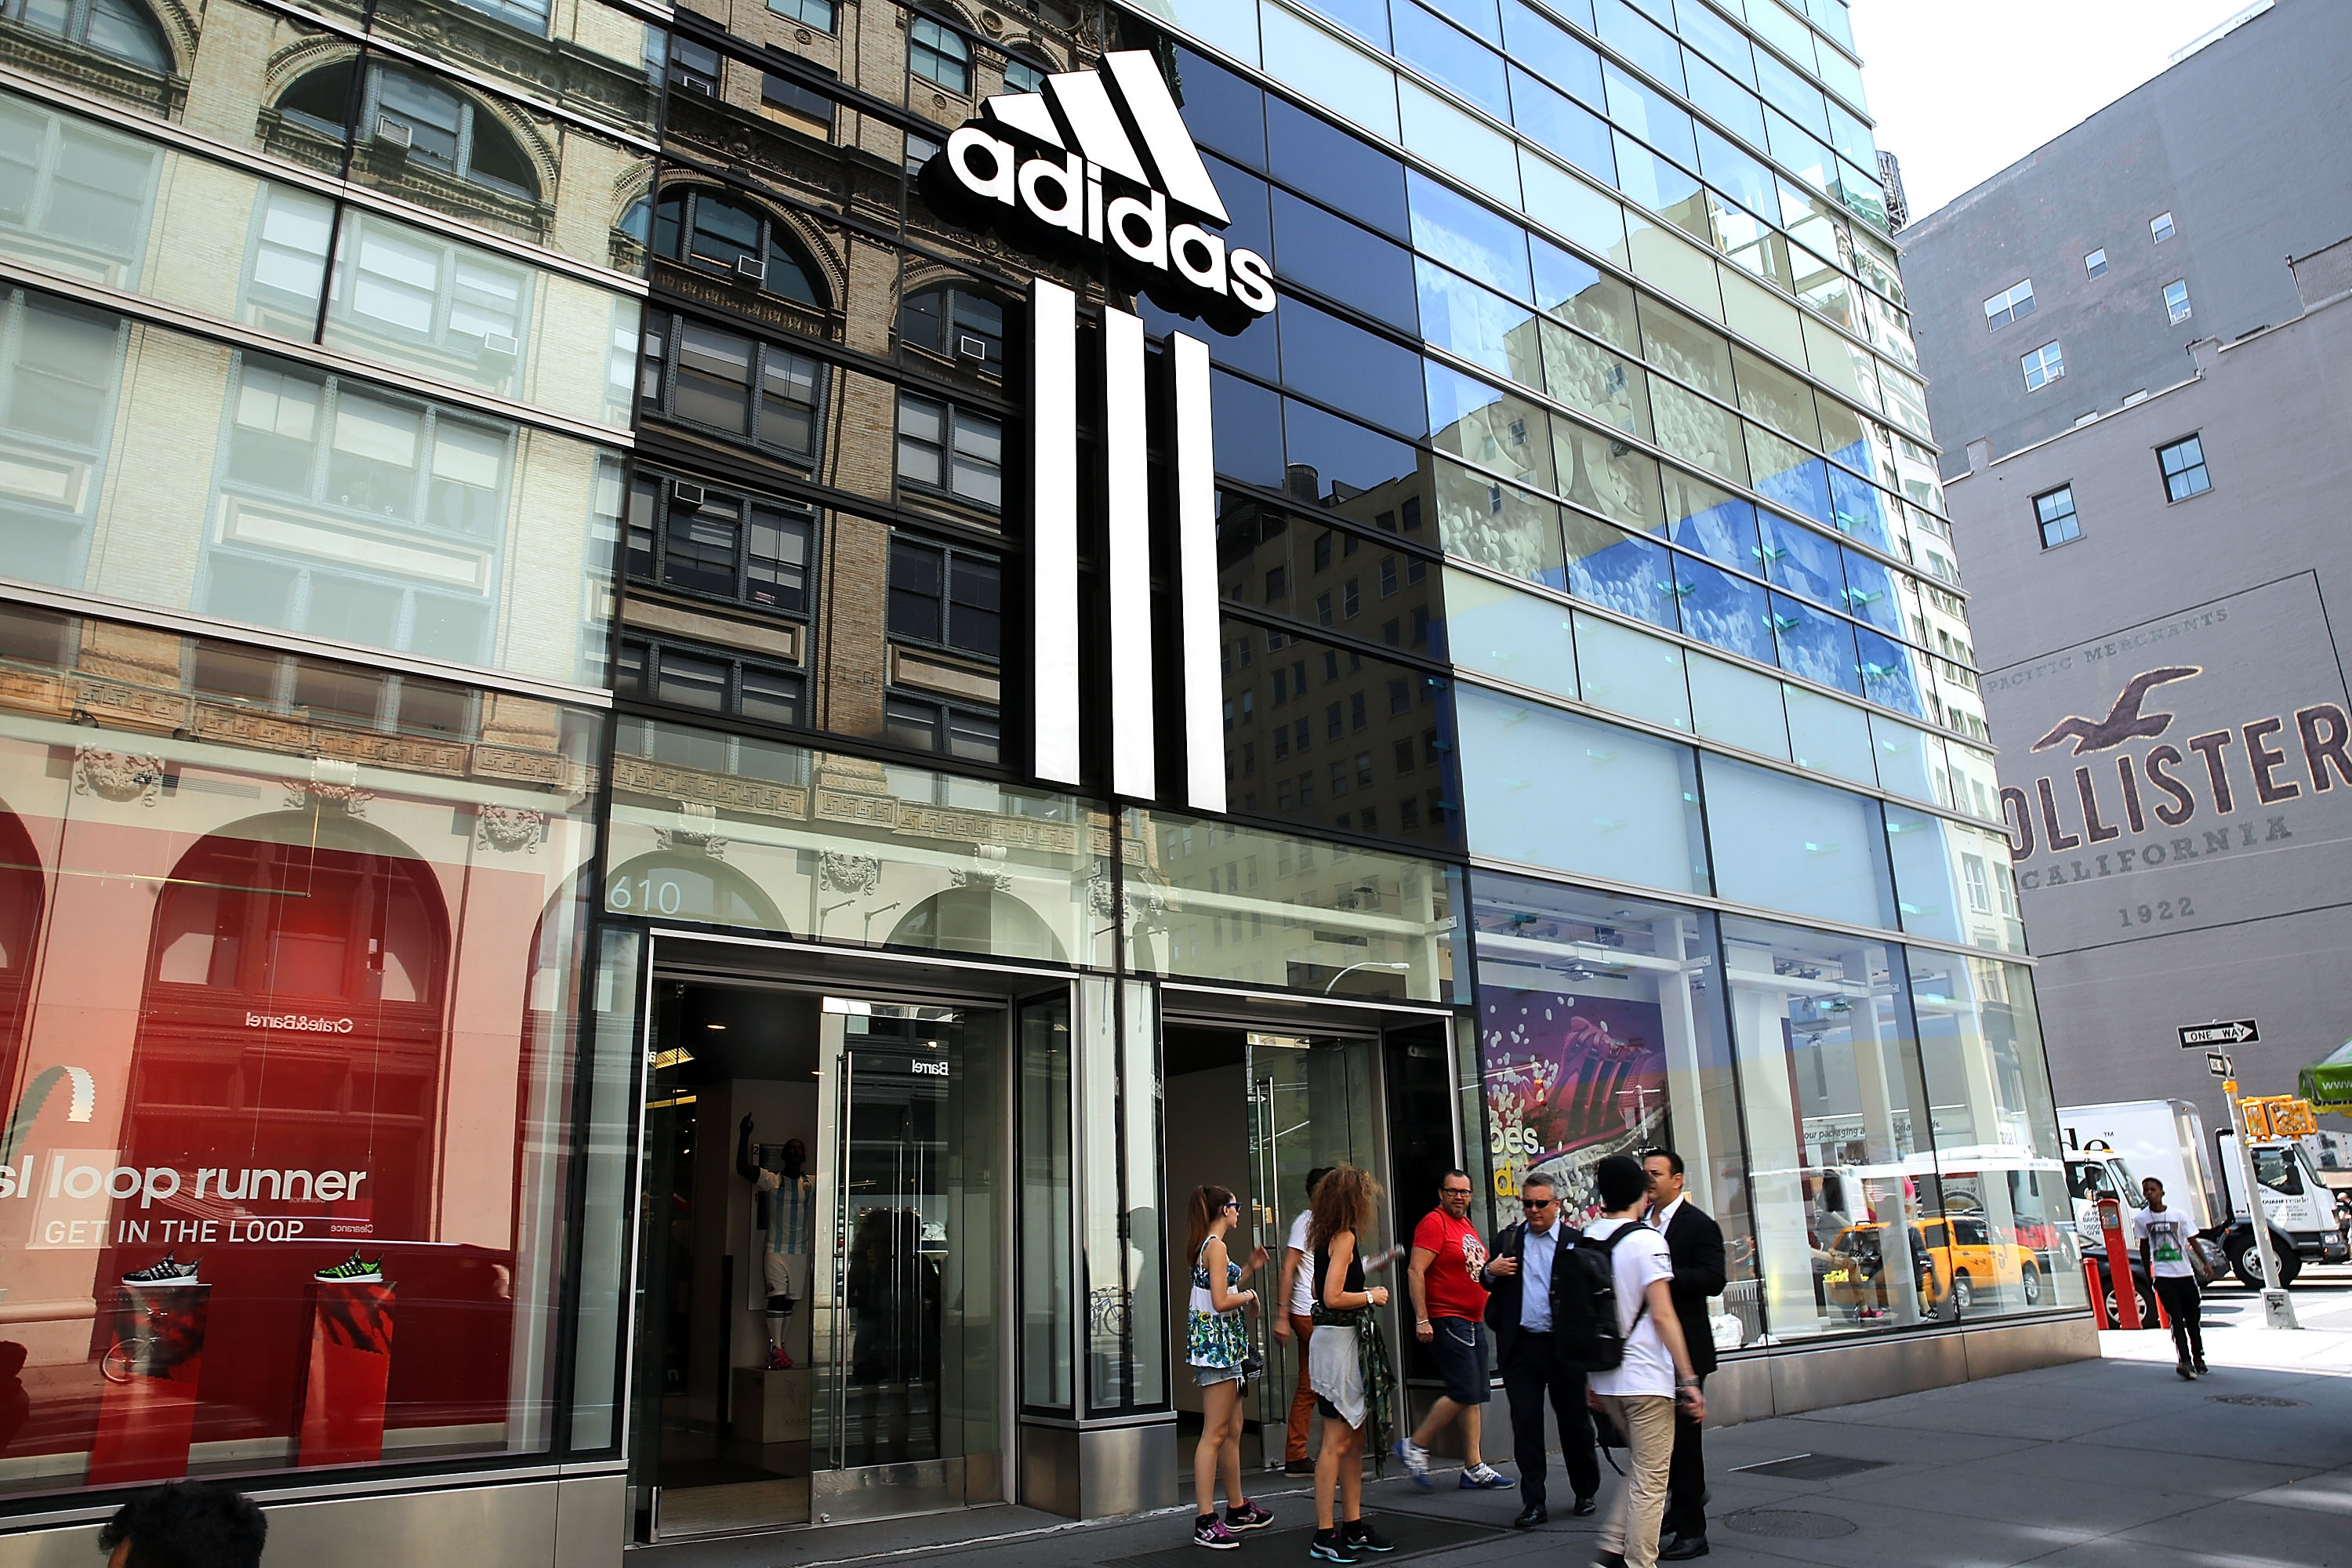 magasin chaussure adidas bruxelles